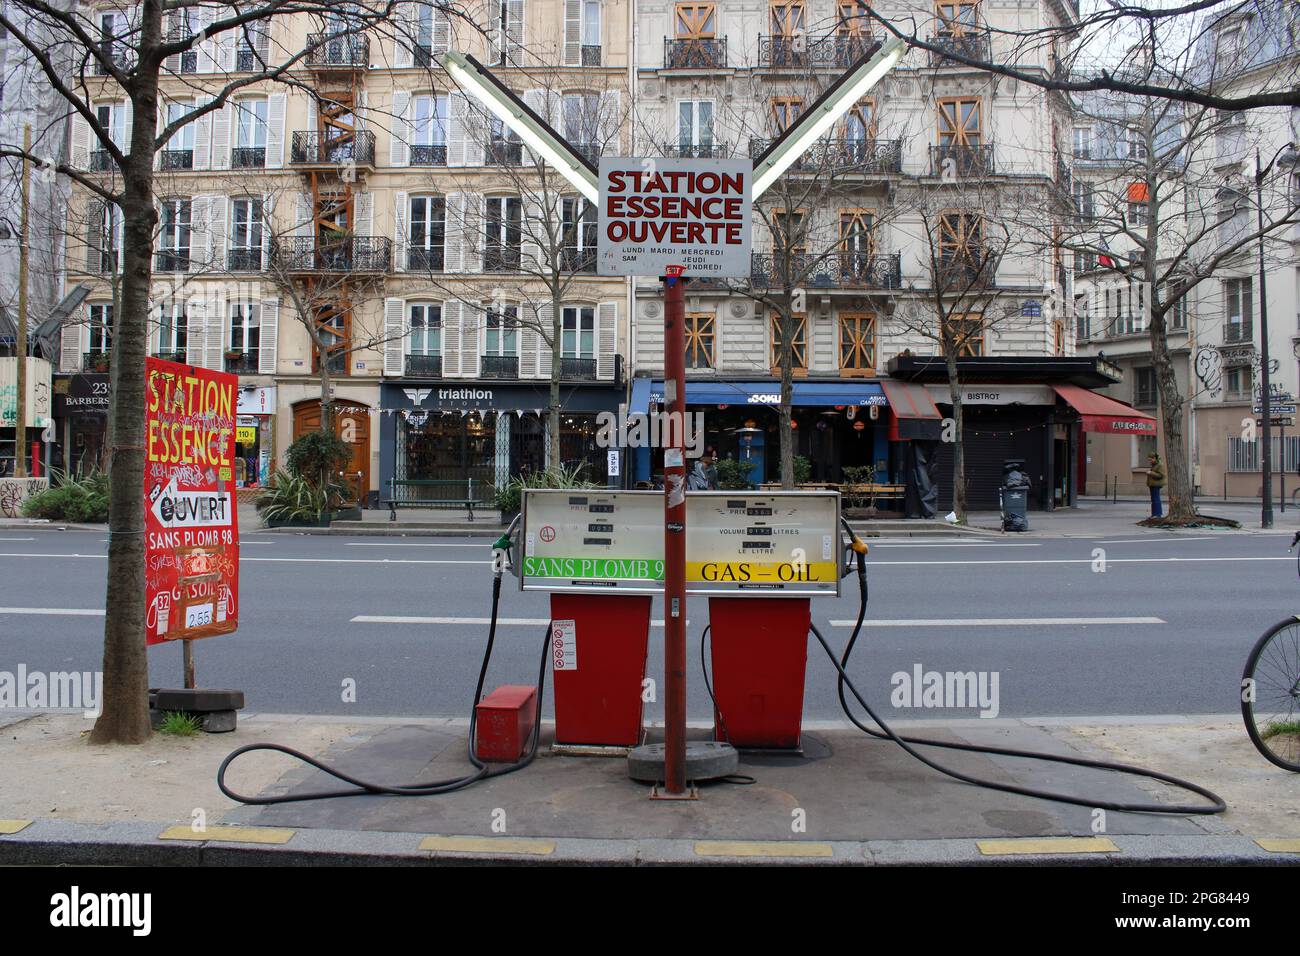 Vintage and retro Petrol Station here located on the Boulevard du Temple situated in the 11th arrondissement of Paris France. Stock Photo